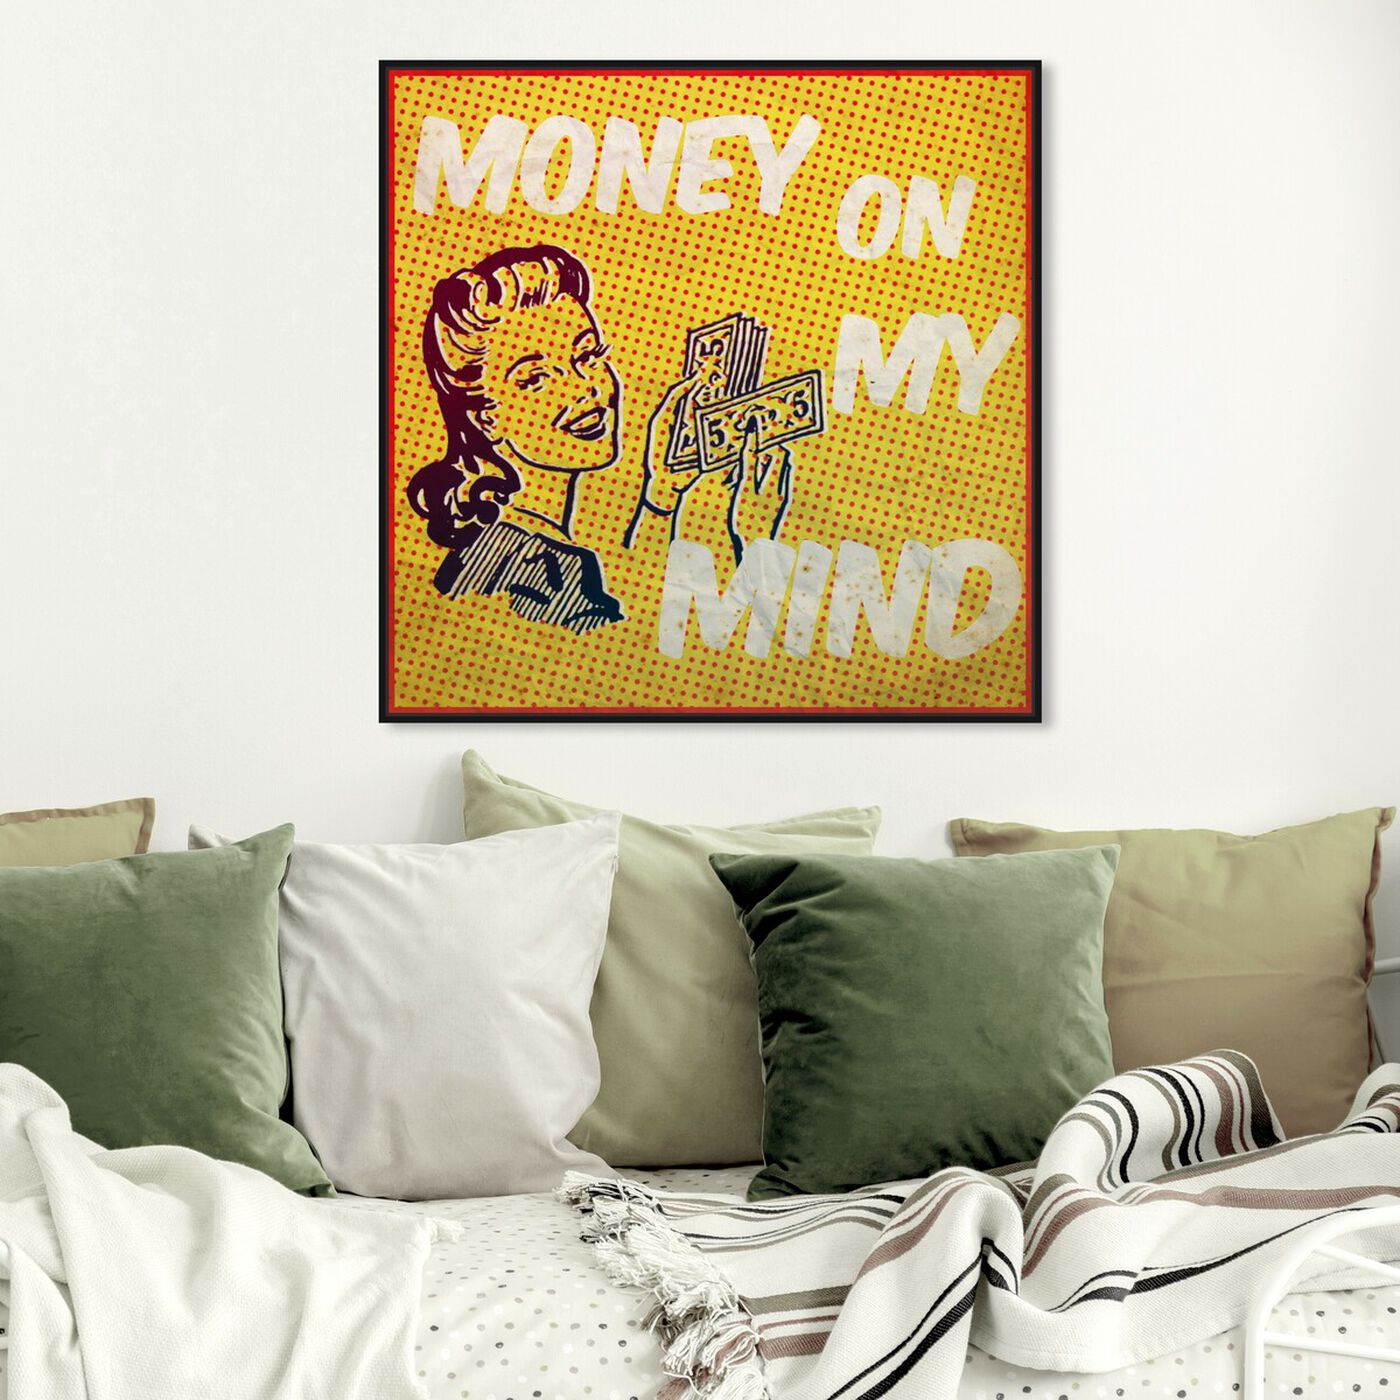 Hanging view of Money on My Mind featuring advertising and comics art.